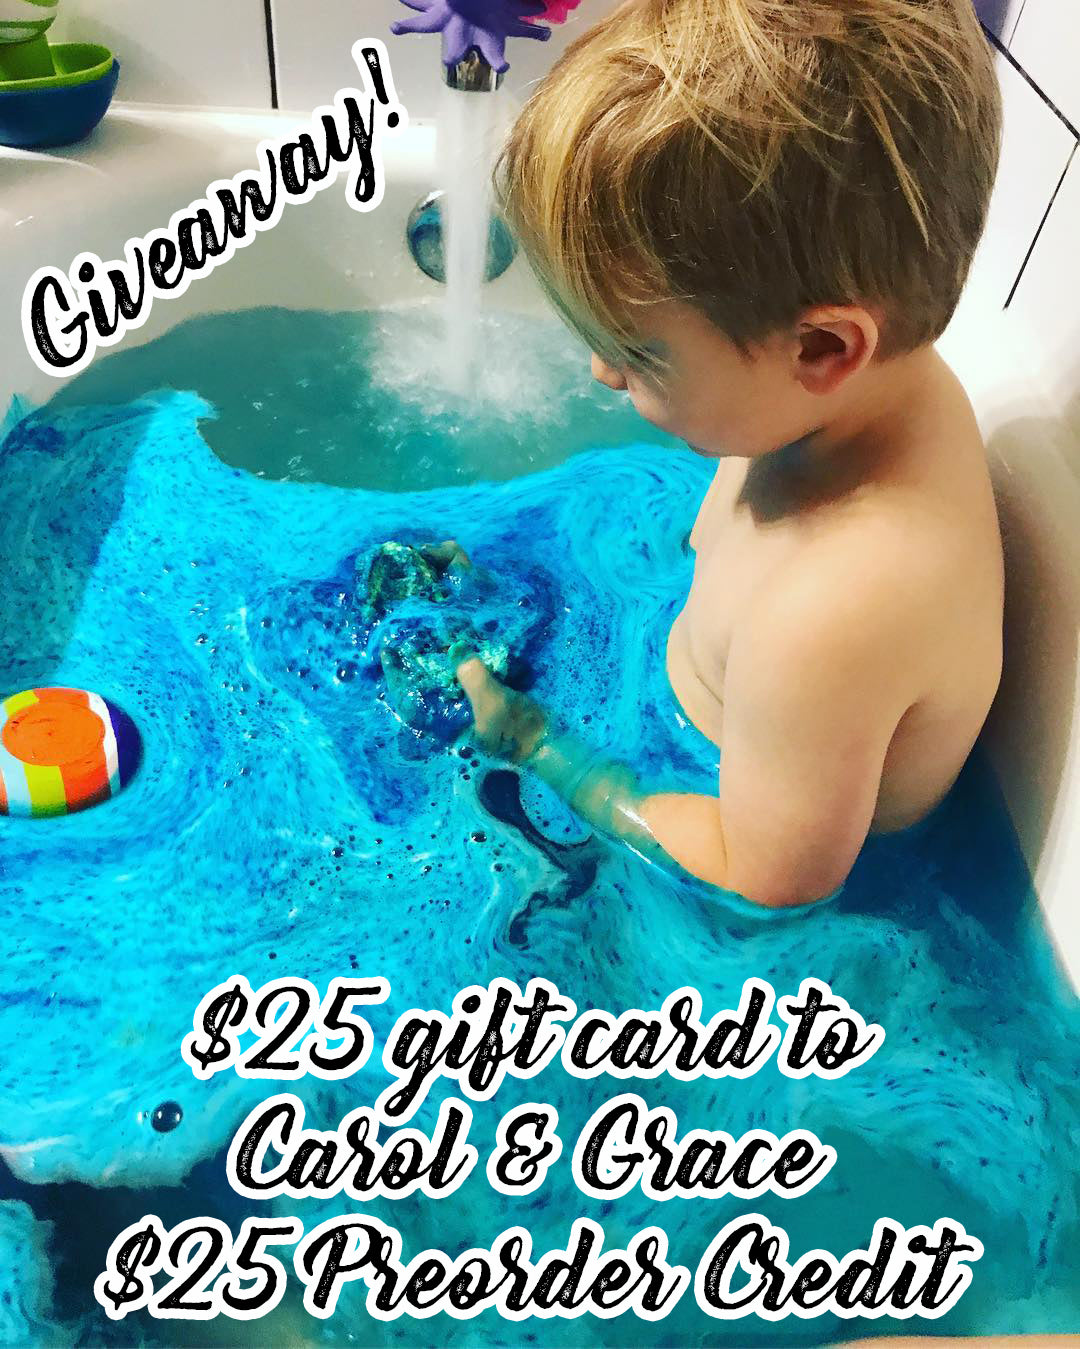 Giveaway with Carol & Grace!